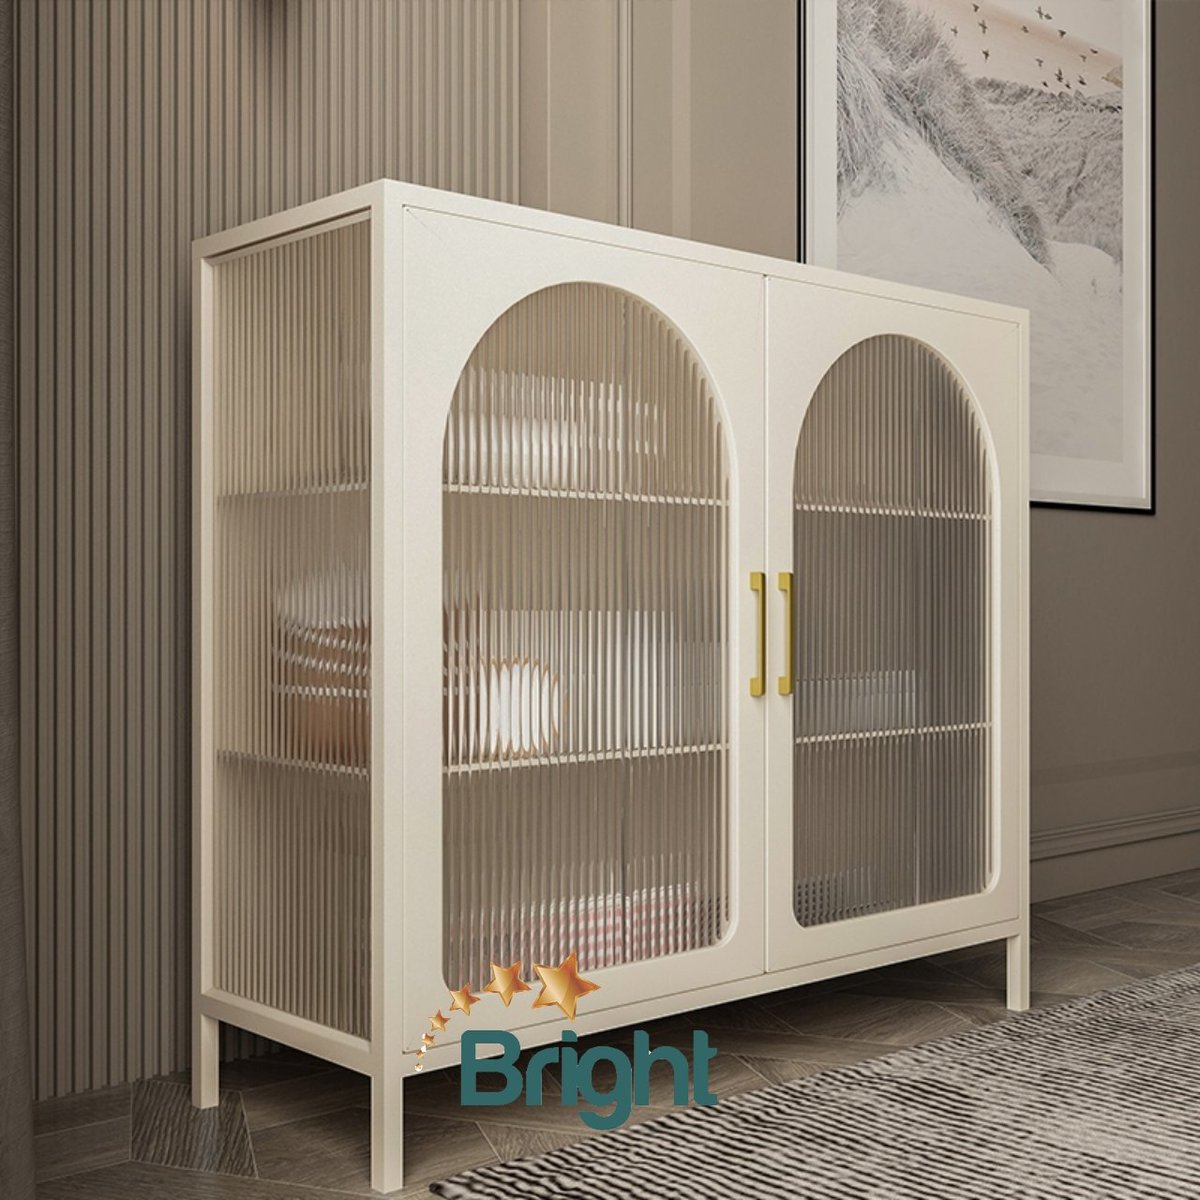 New model of home storage cabinet
Combine the beauty of glass + steel
Bring more brightness to your home

#nordic #flatpackaged #homestorage #furniture #glass #factorydirect #mailpackage #steel #custom #producer #luoyangbright